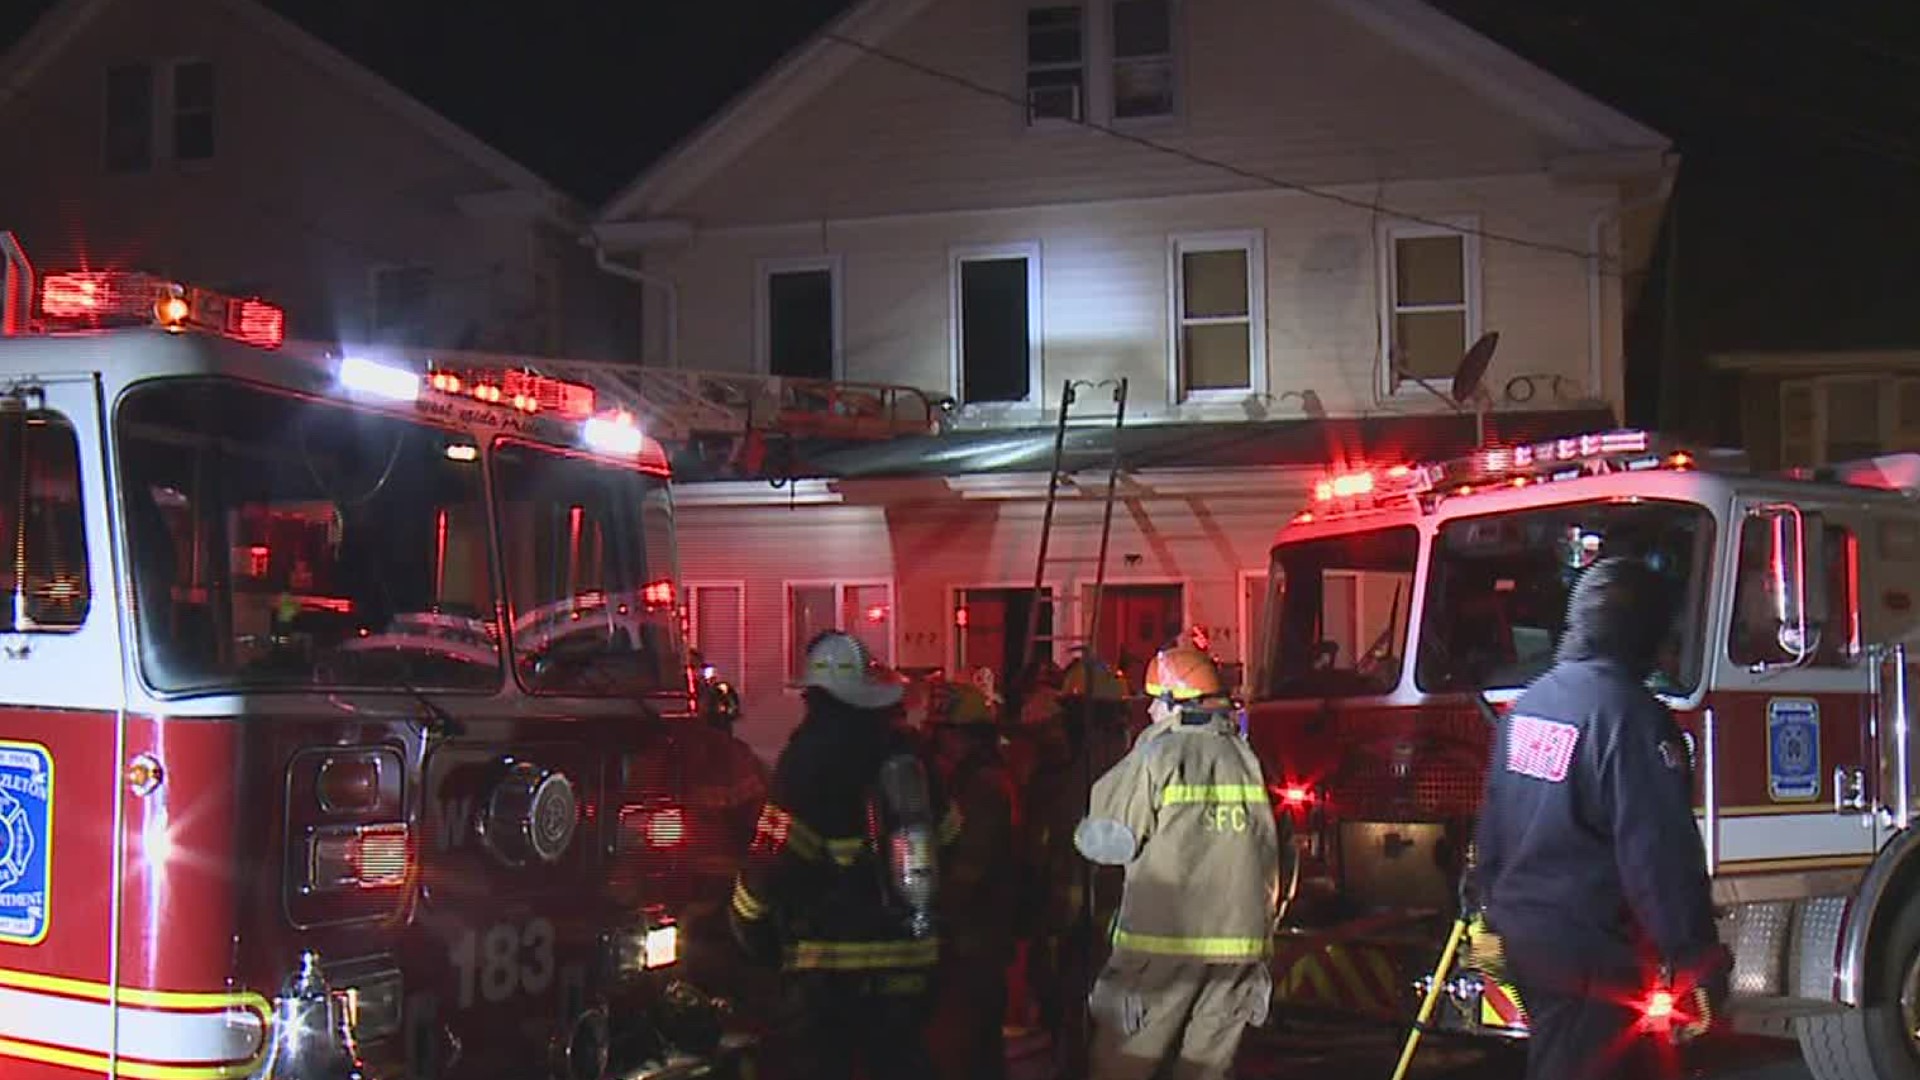 Six people are out of their homes after a late-night fire in Luzerne County.